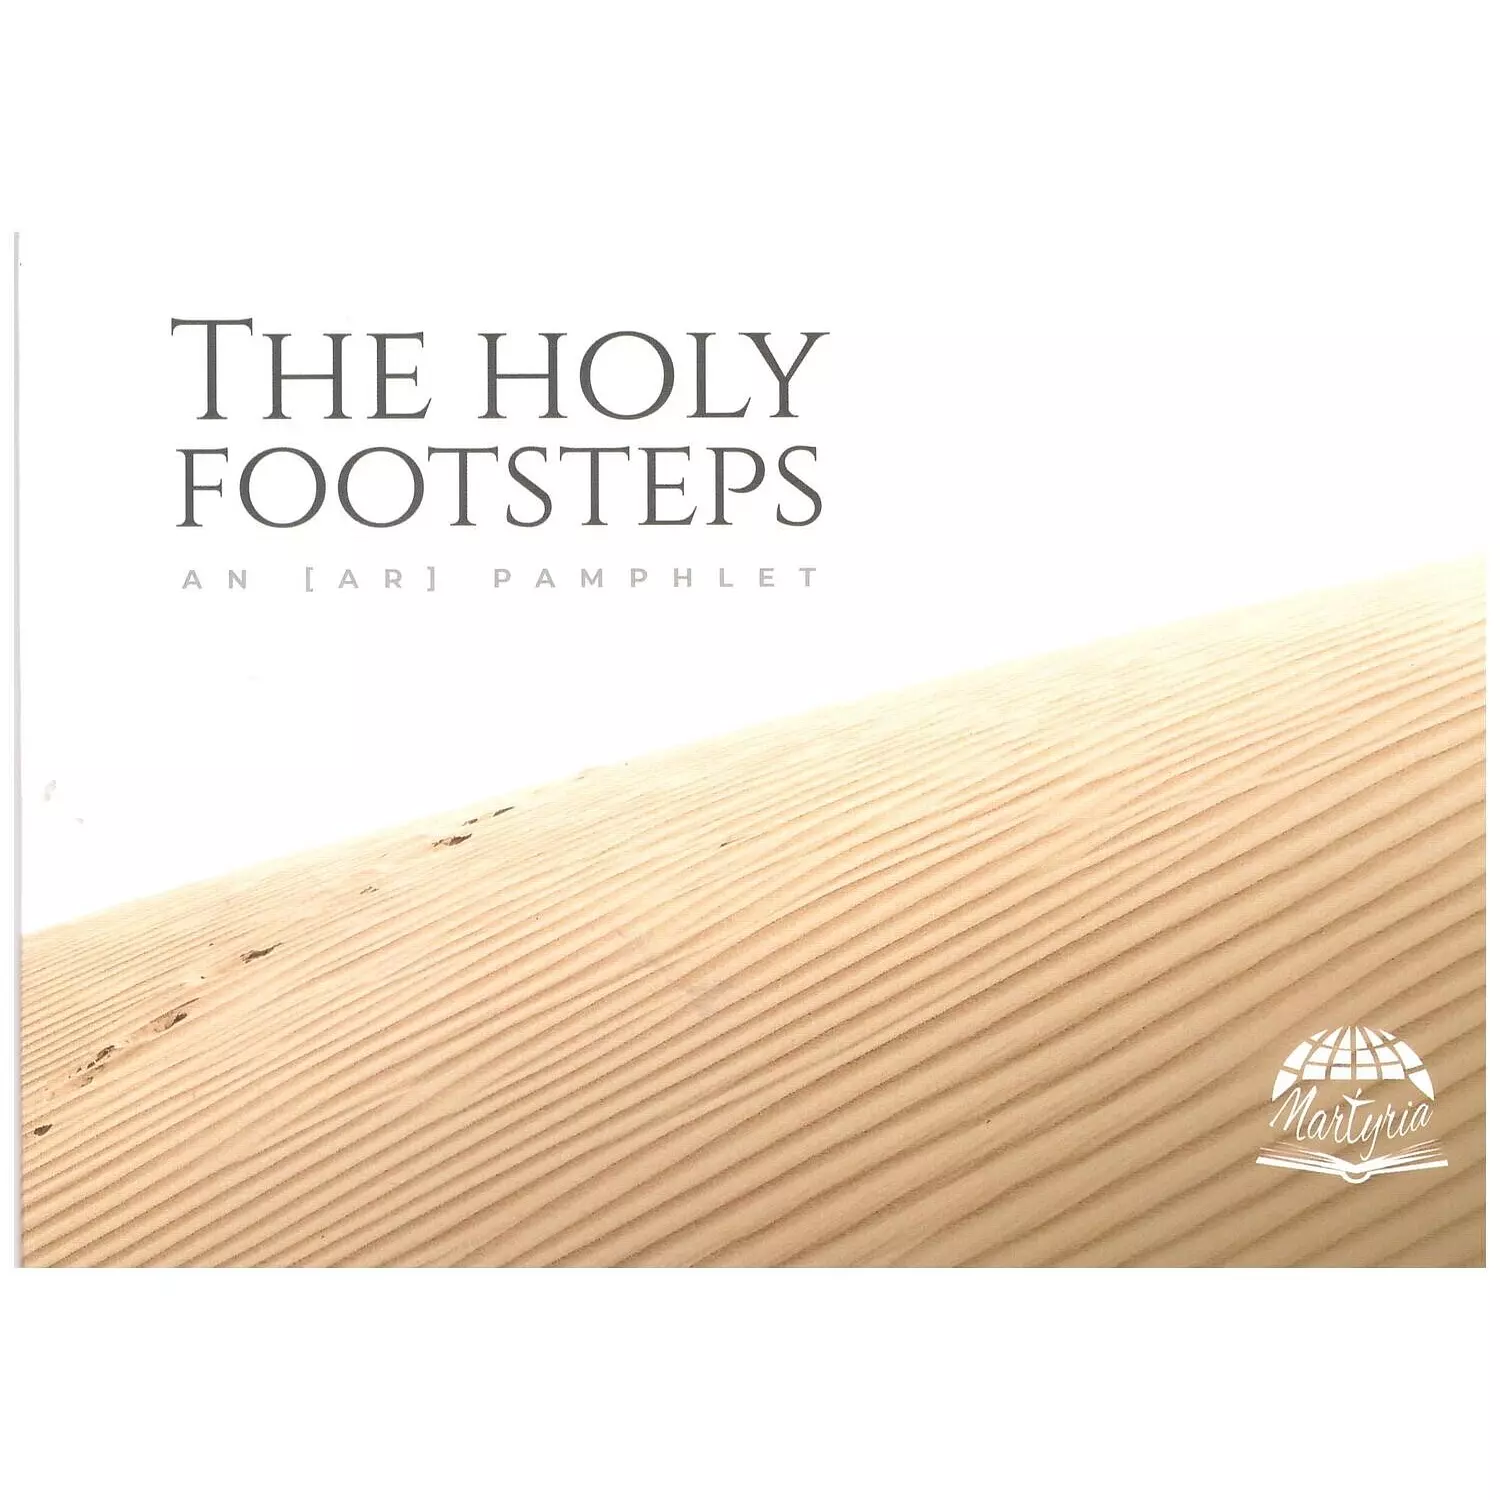 The holy footsteps hover image